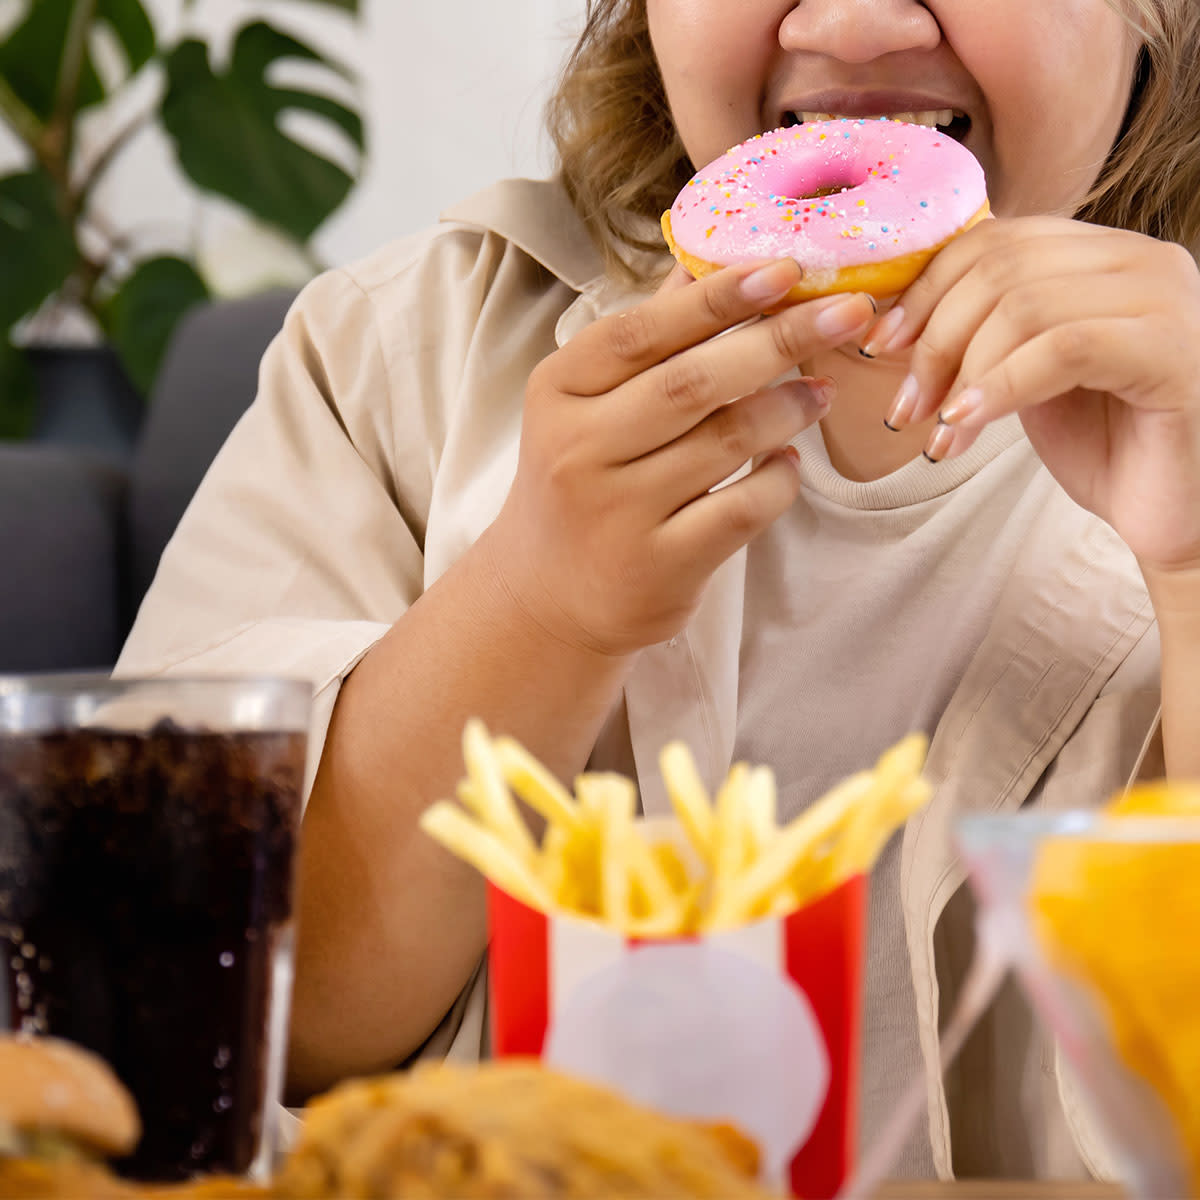 woman eating junk food donuts and fries